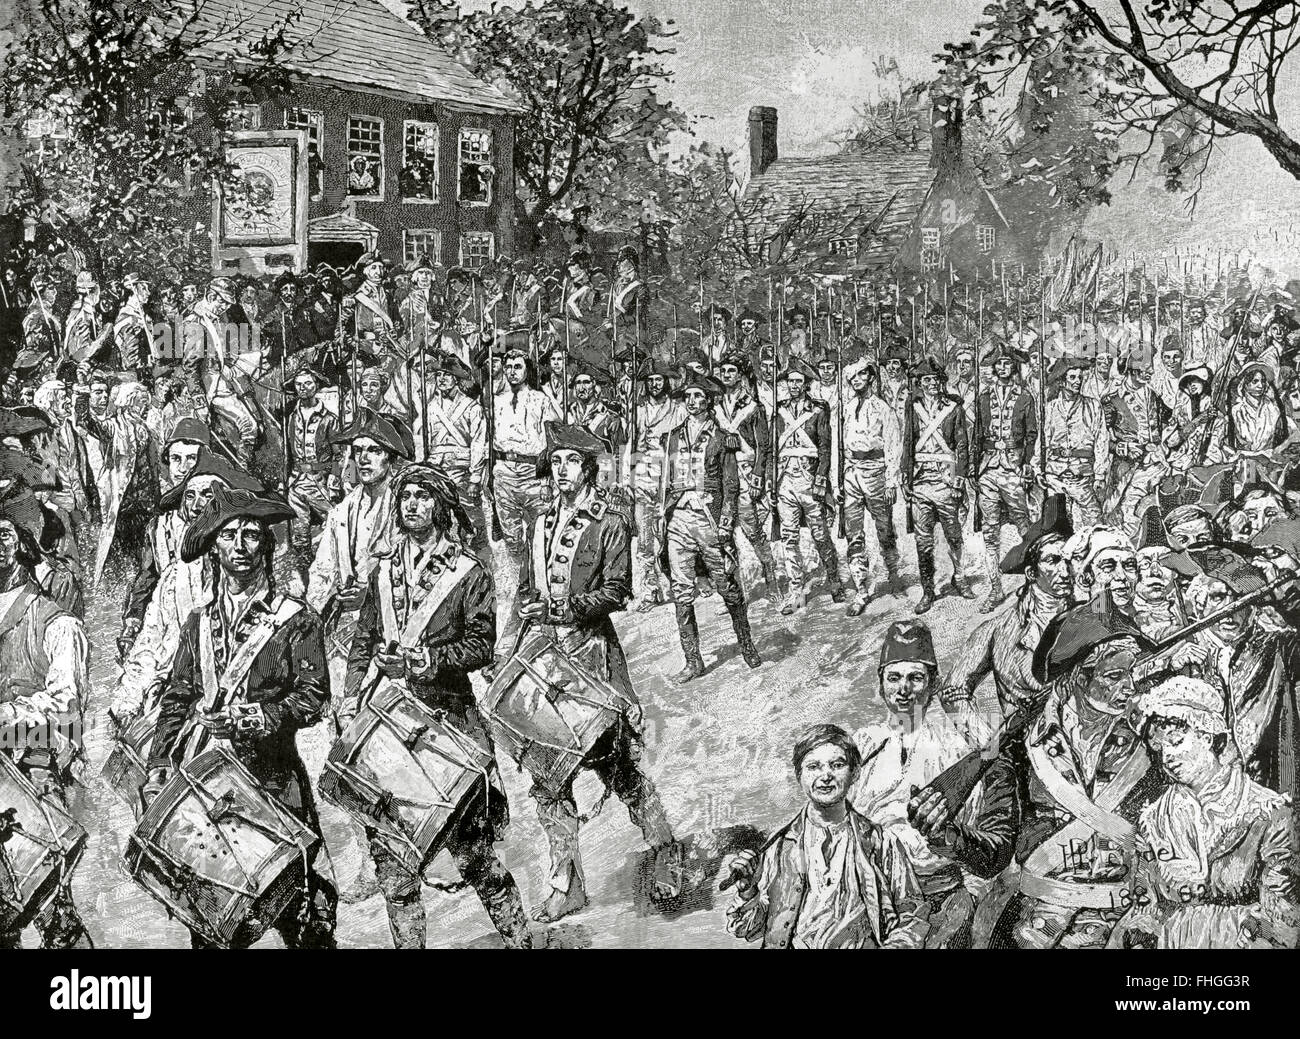 American Revolutionary War (1775-1783). The end of the War. The North American insurgent army marching towards New York. Engraving by Howard Pyle. 19th century. Stock Photo